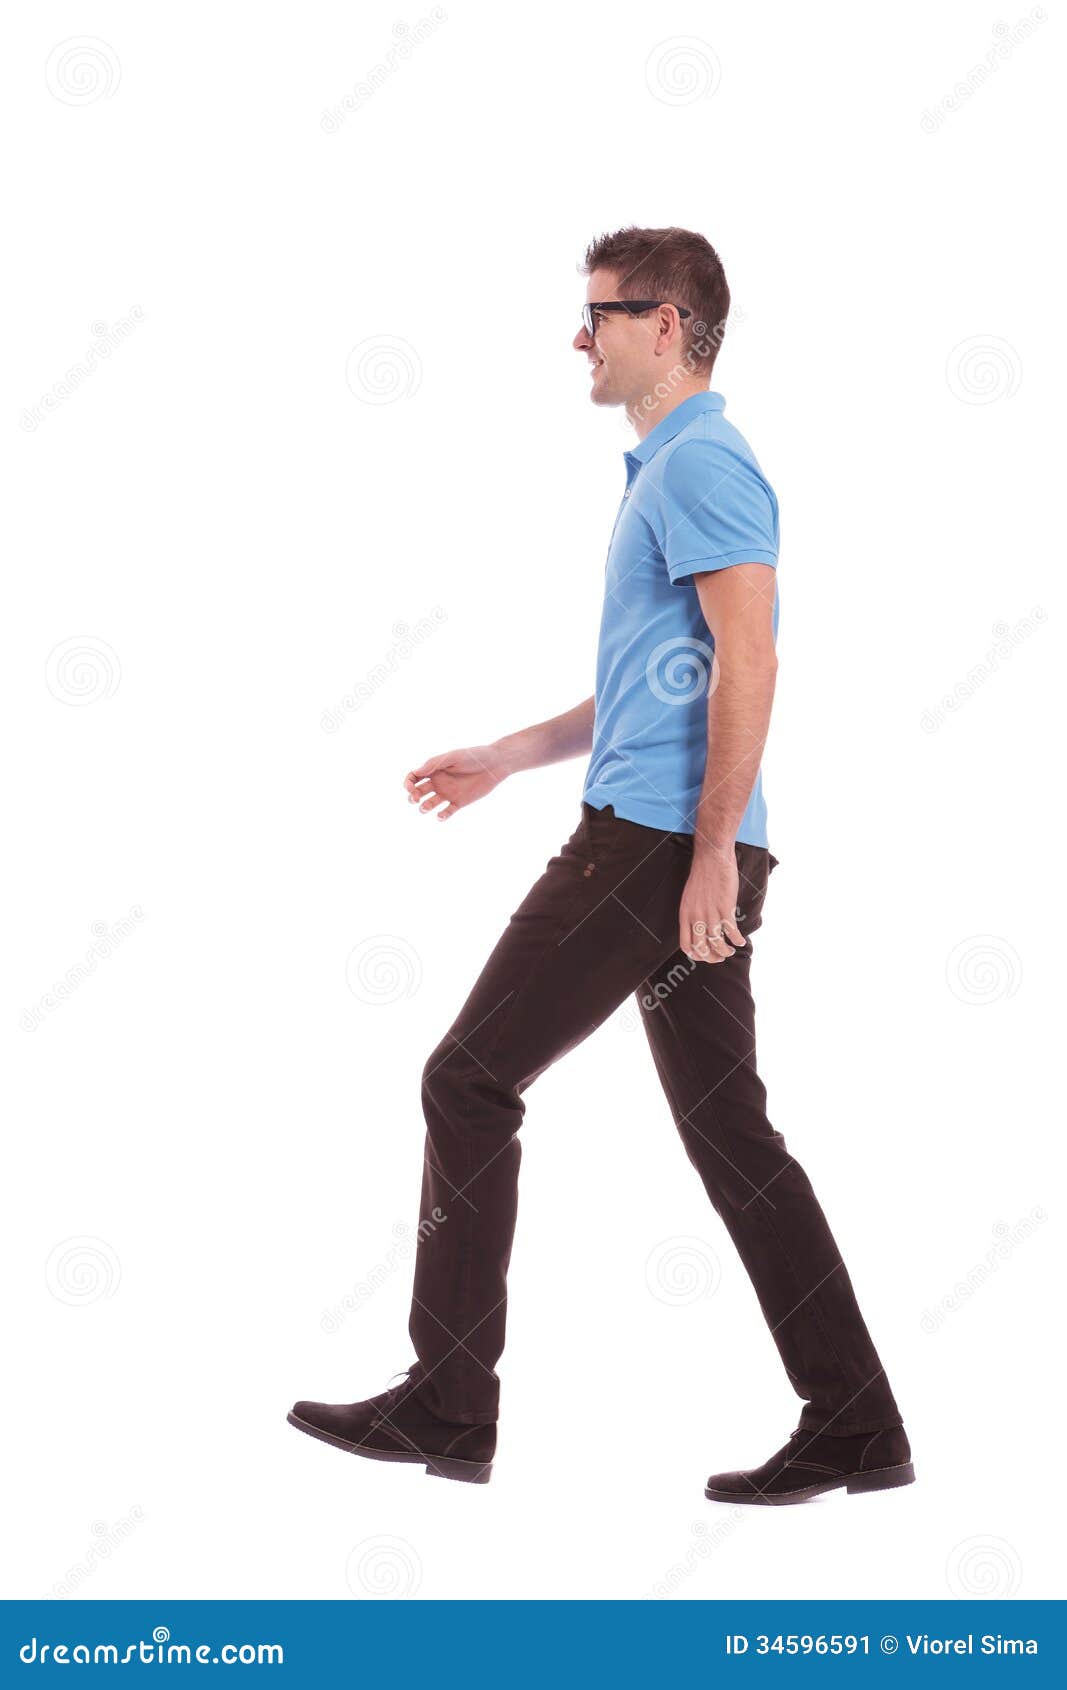 Profile of a Casual Man Walking Stock Image - Image of movement, cute ...